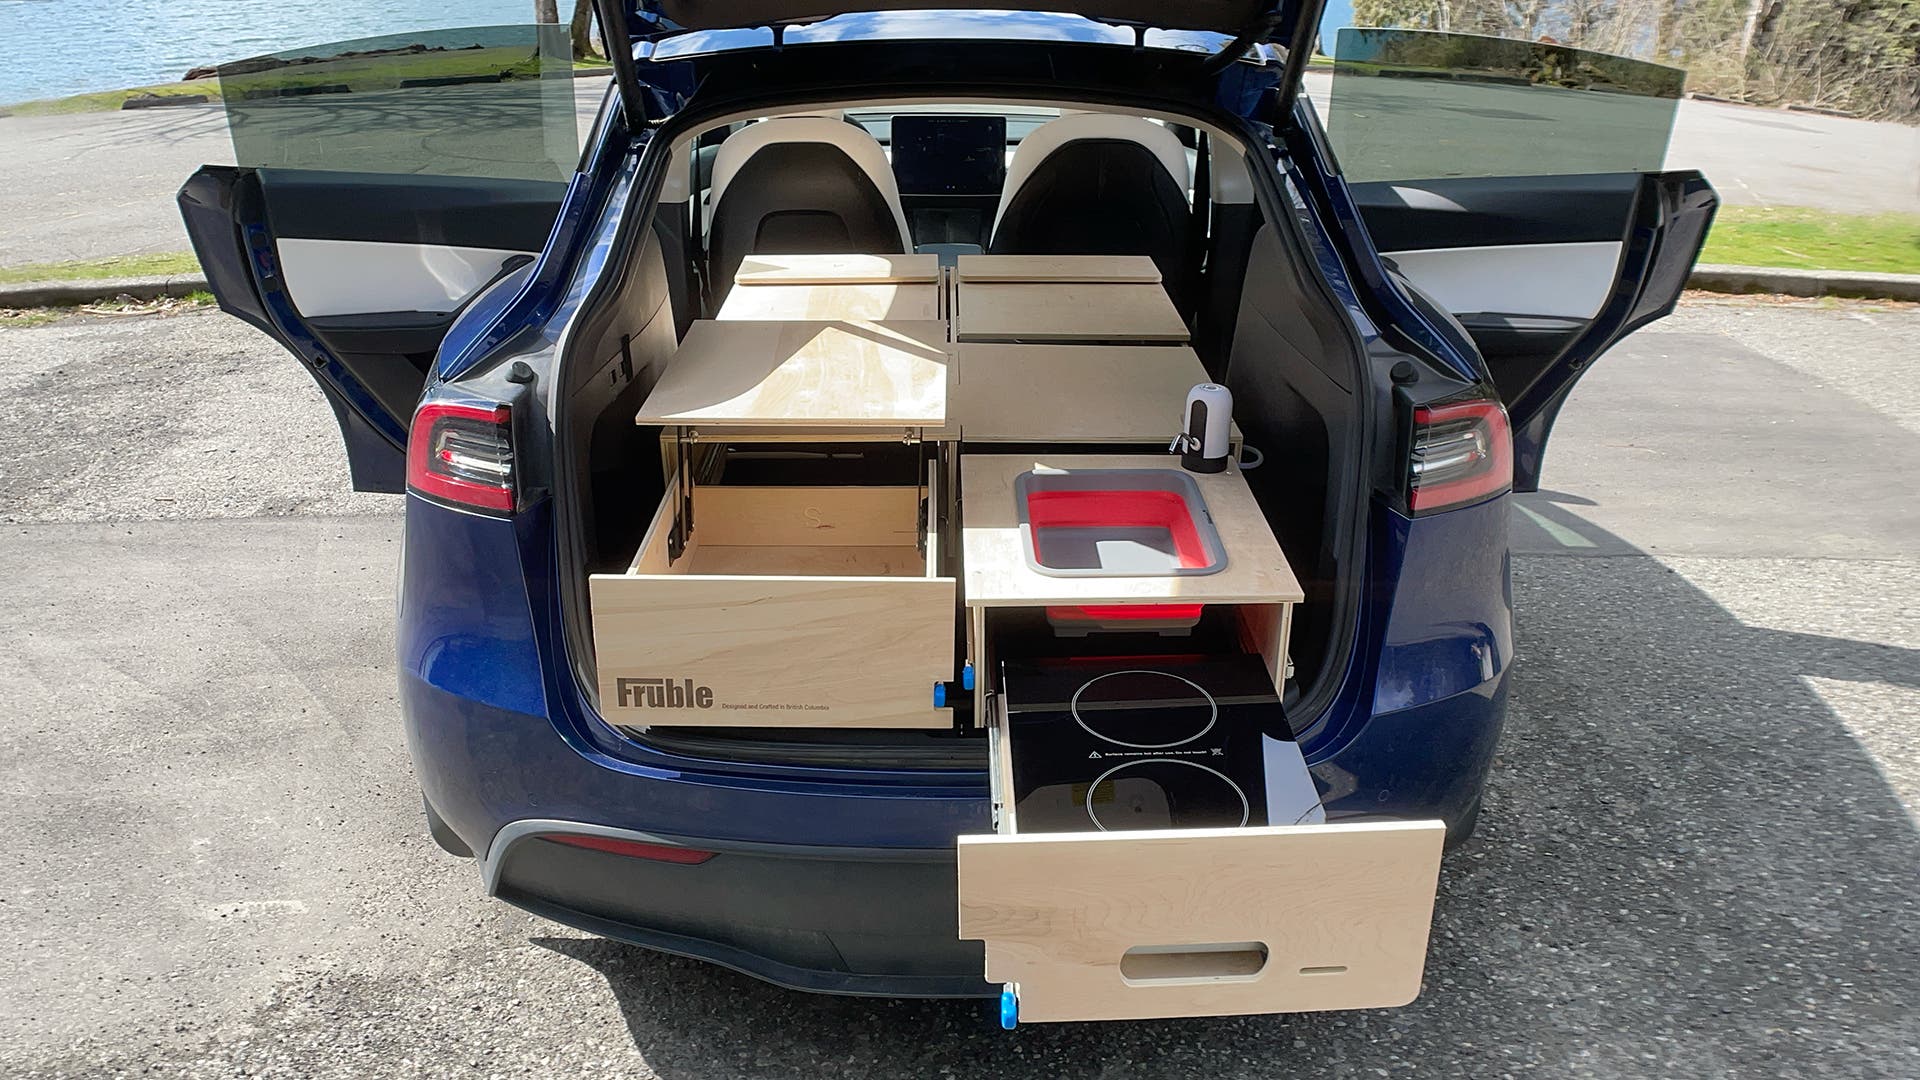 The Complete Fruble Camper Kit Unlocks Camping Mode For The Tesla Model Y -  CleanTechnica